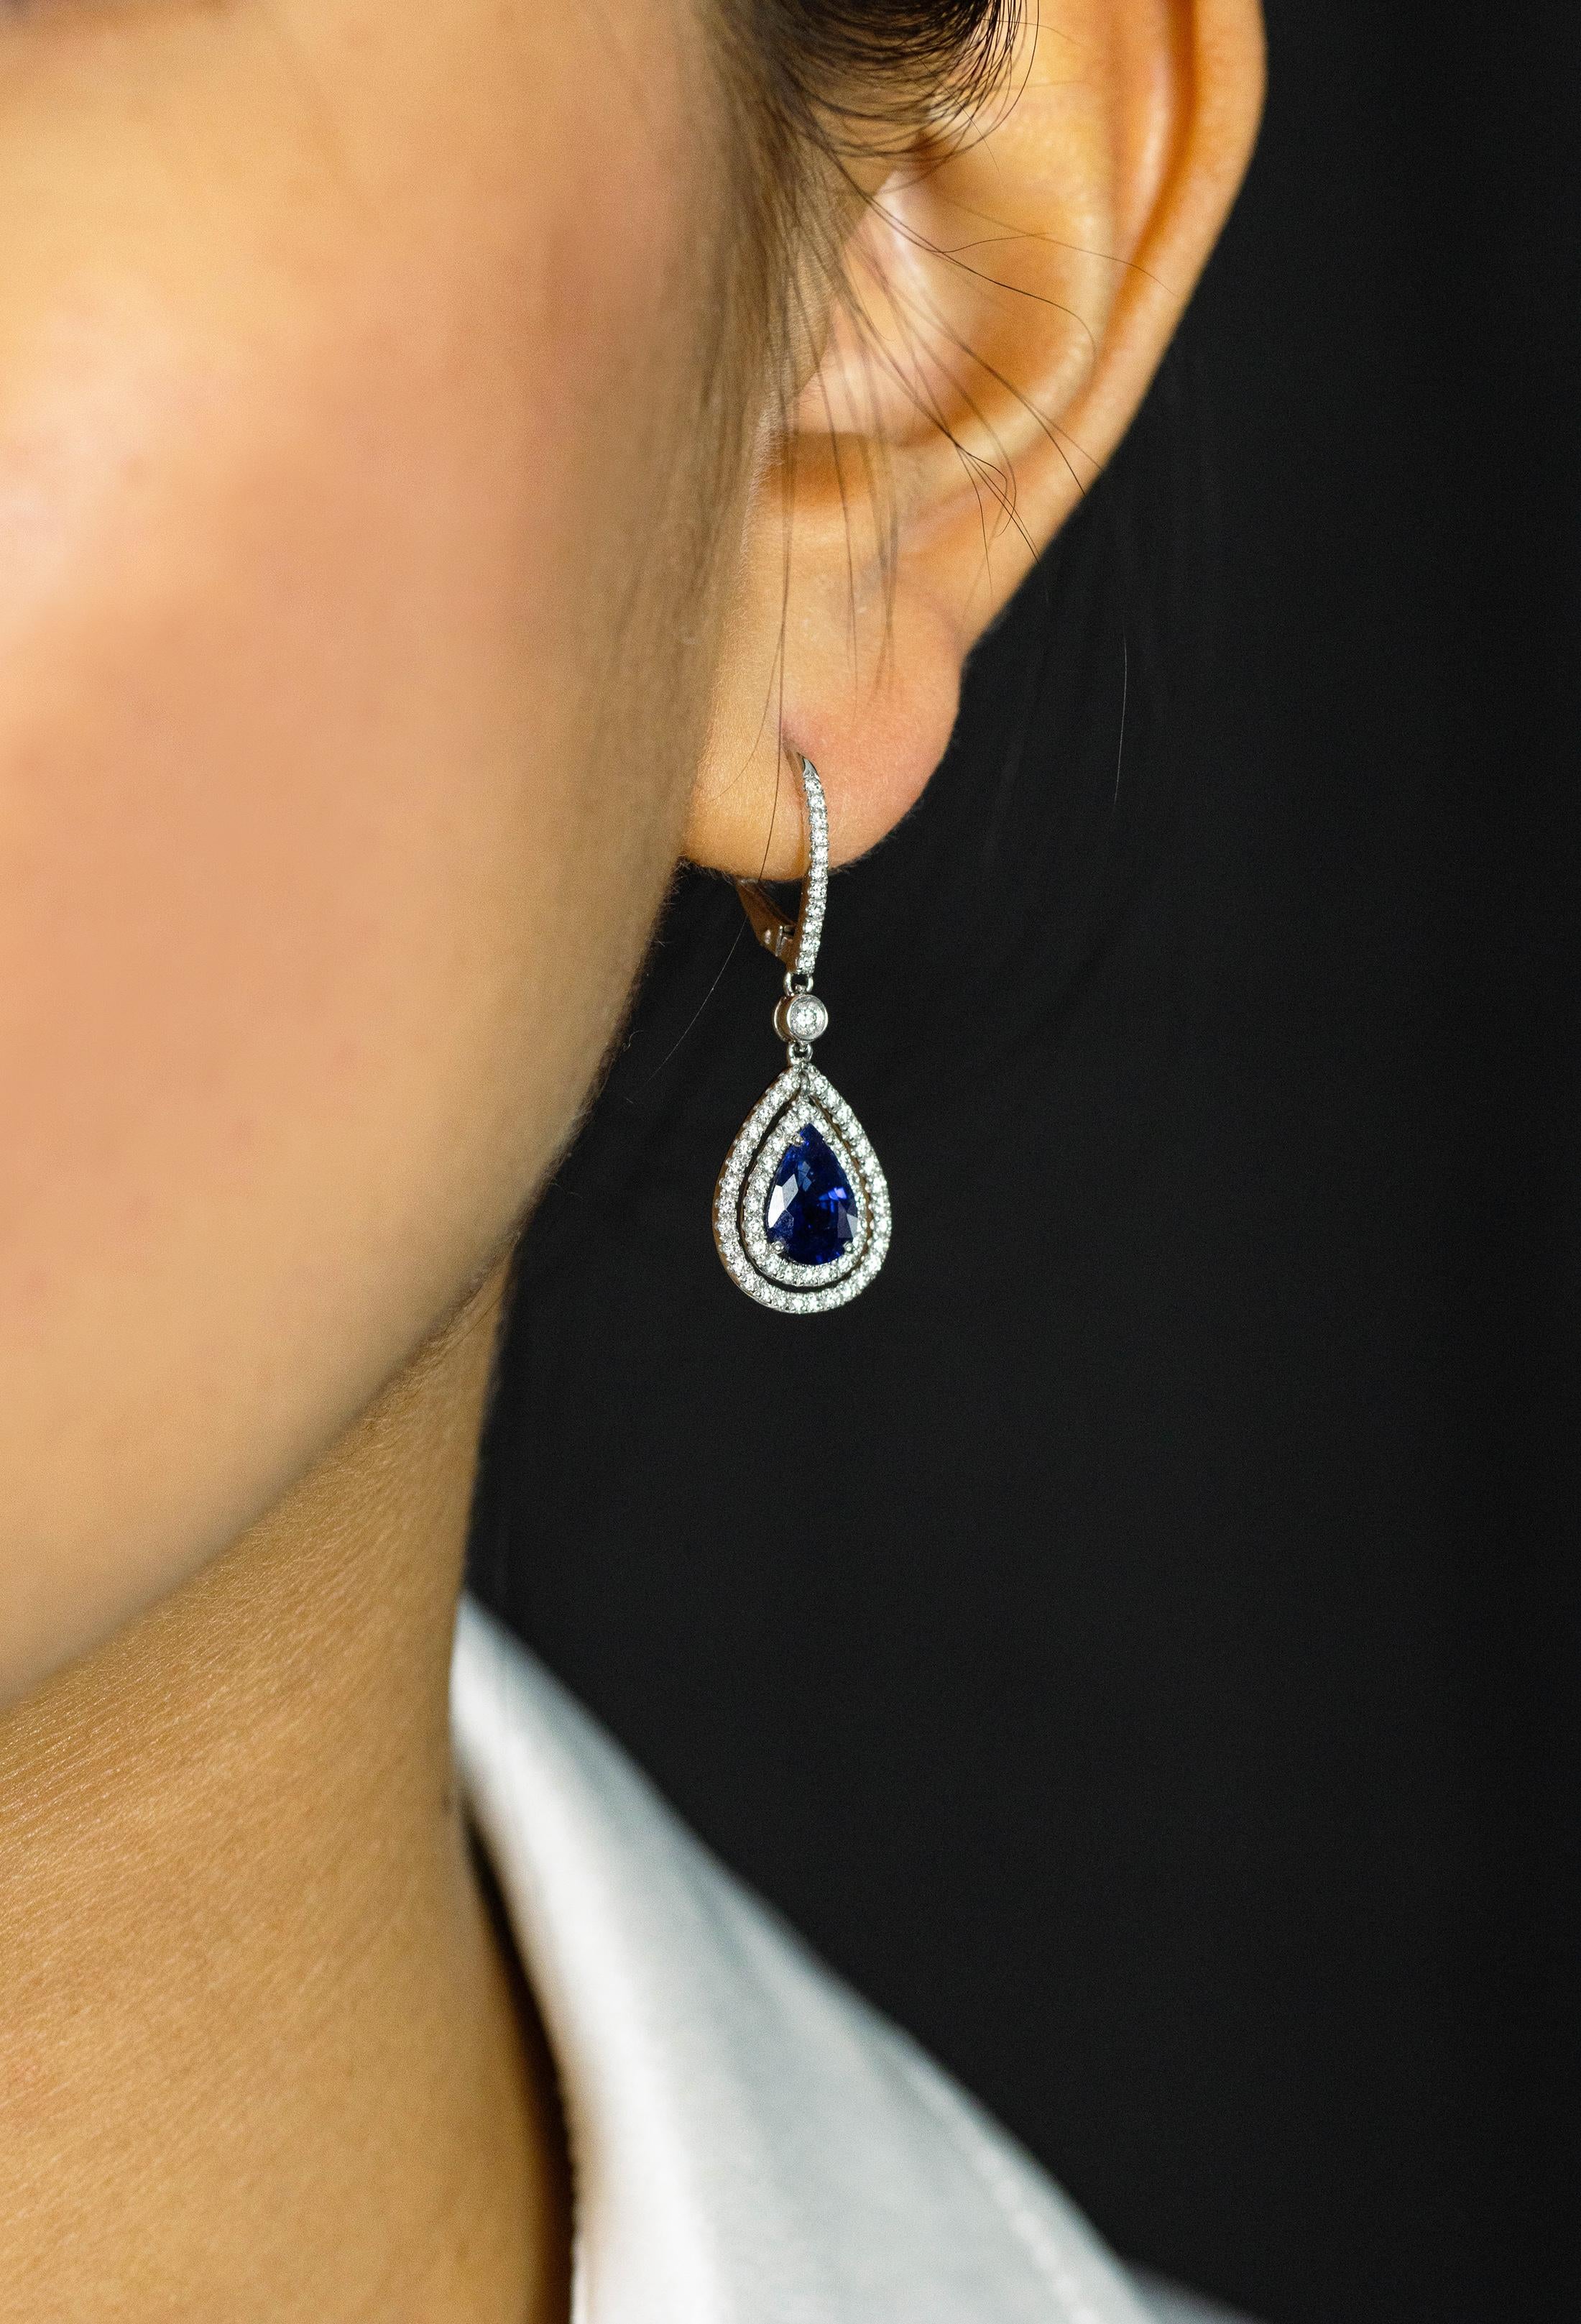 Showcasing pear shape sapphires surrounded by two rows of round brilliant diamonds in an open-work design and suspended on an accented lever-back made in 18K white gold. Sapphires weigh 2.57 carats total; diamonds weigh 0.69 carats total.

Roman